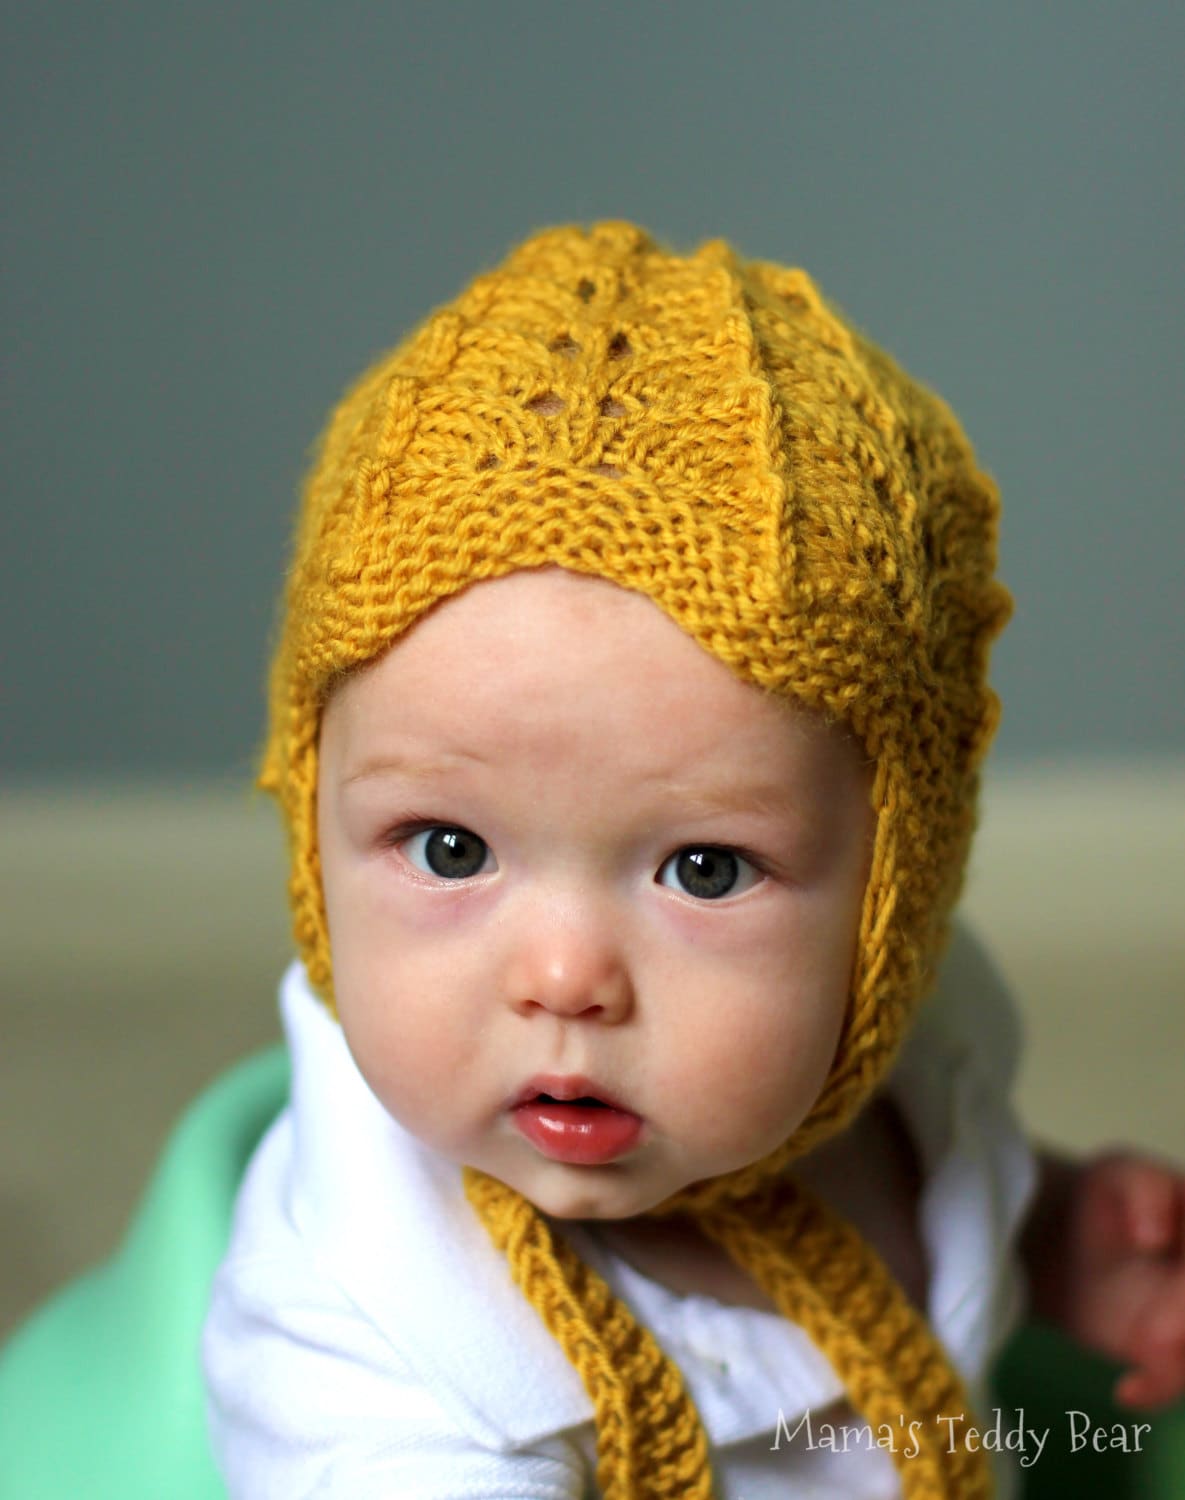 Mustard Yellow Wool Lace Bonnet Vintage Inspired by MamasTeddyBear